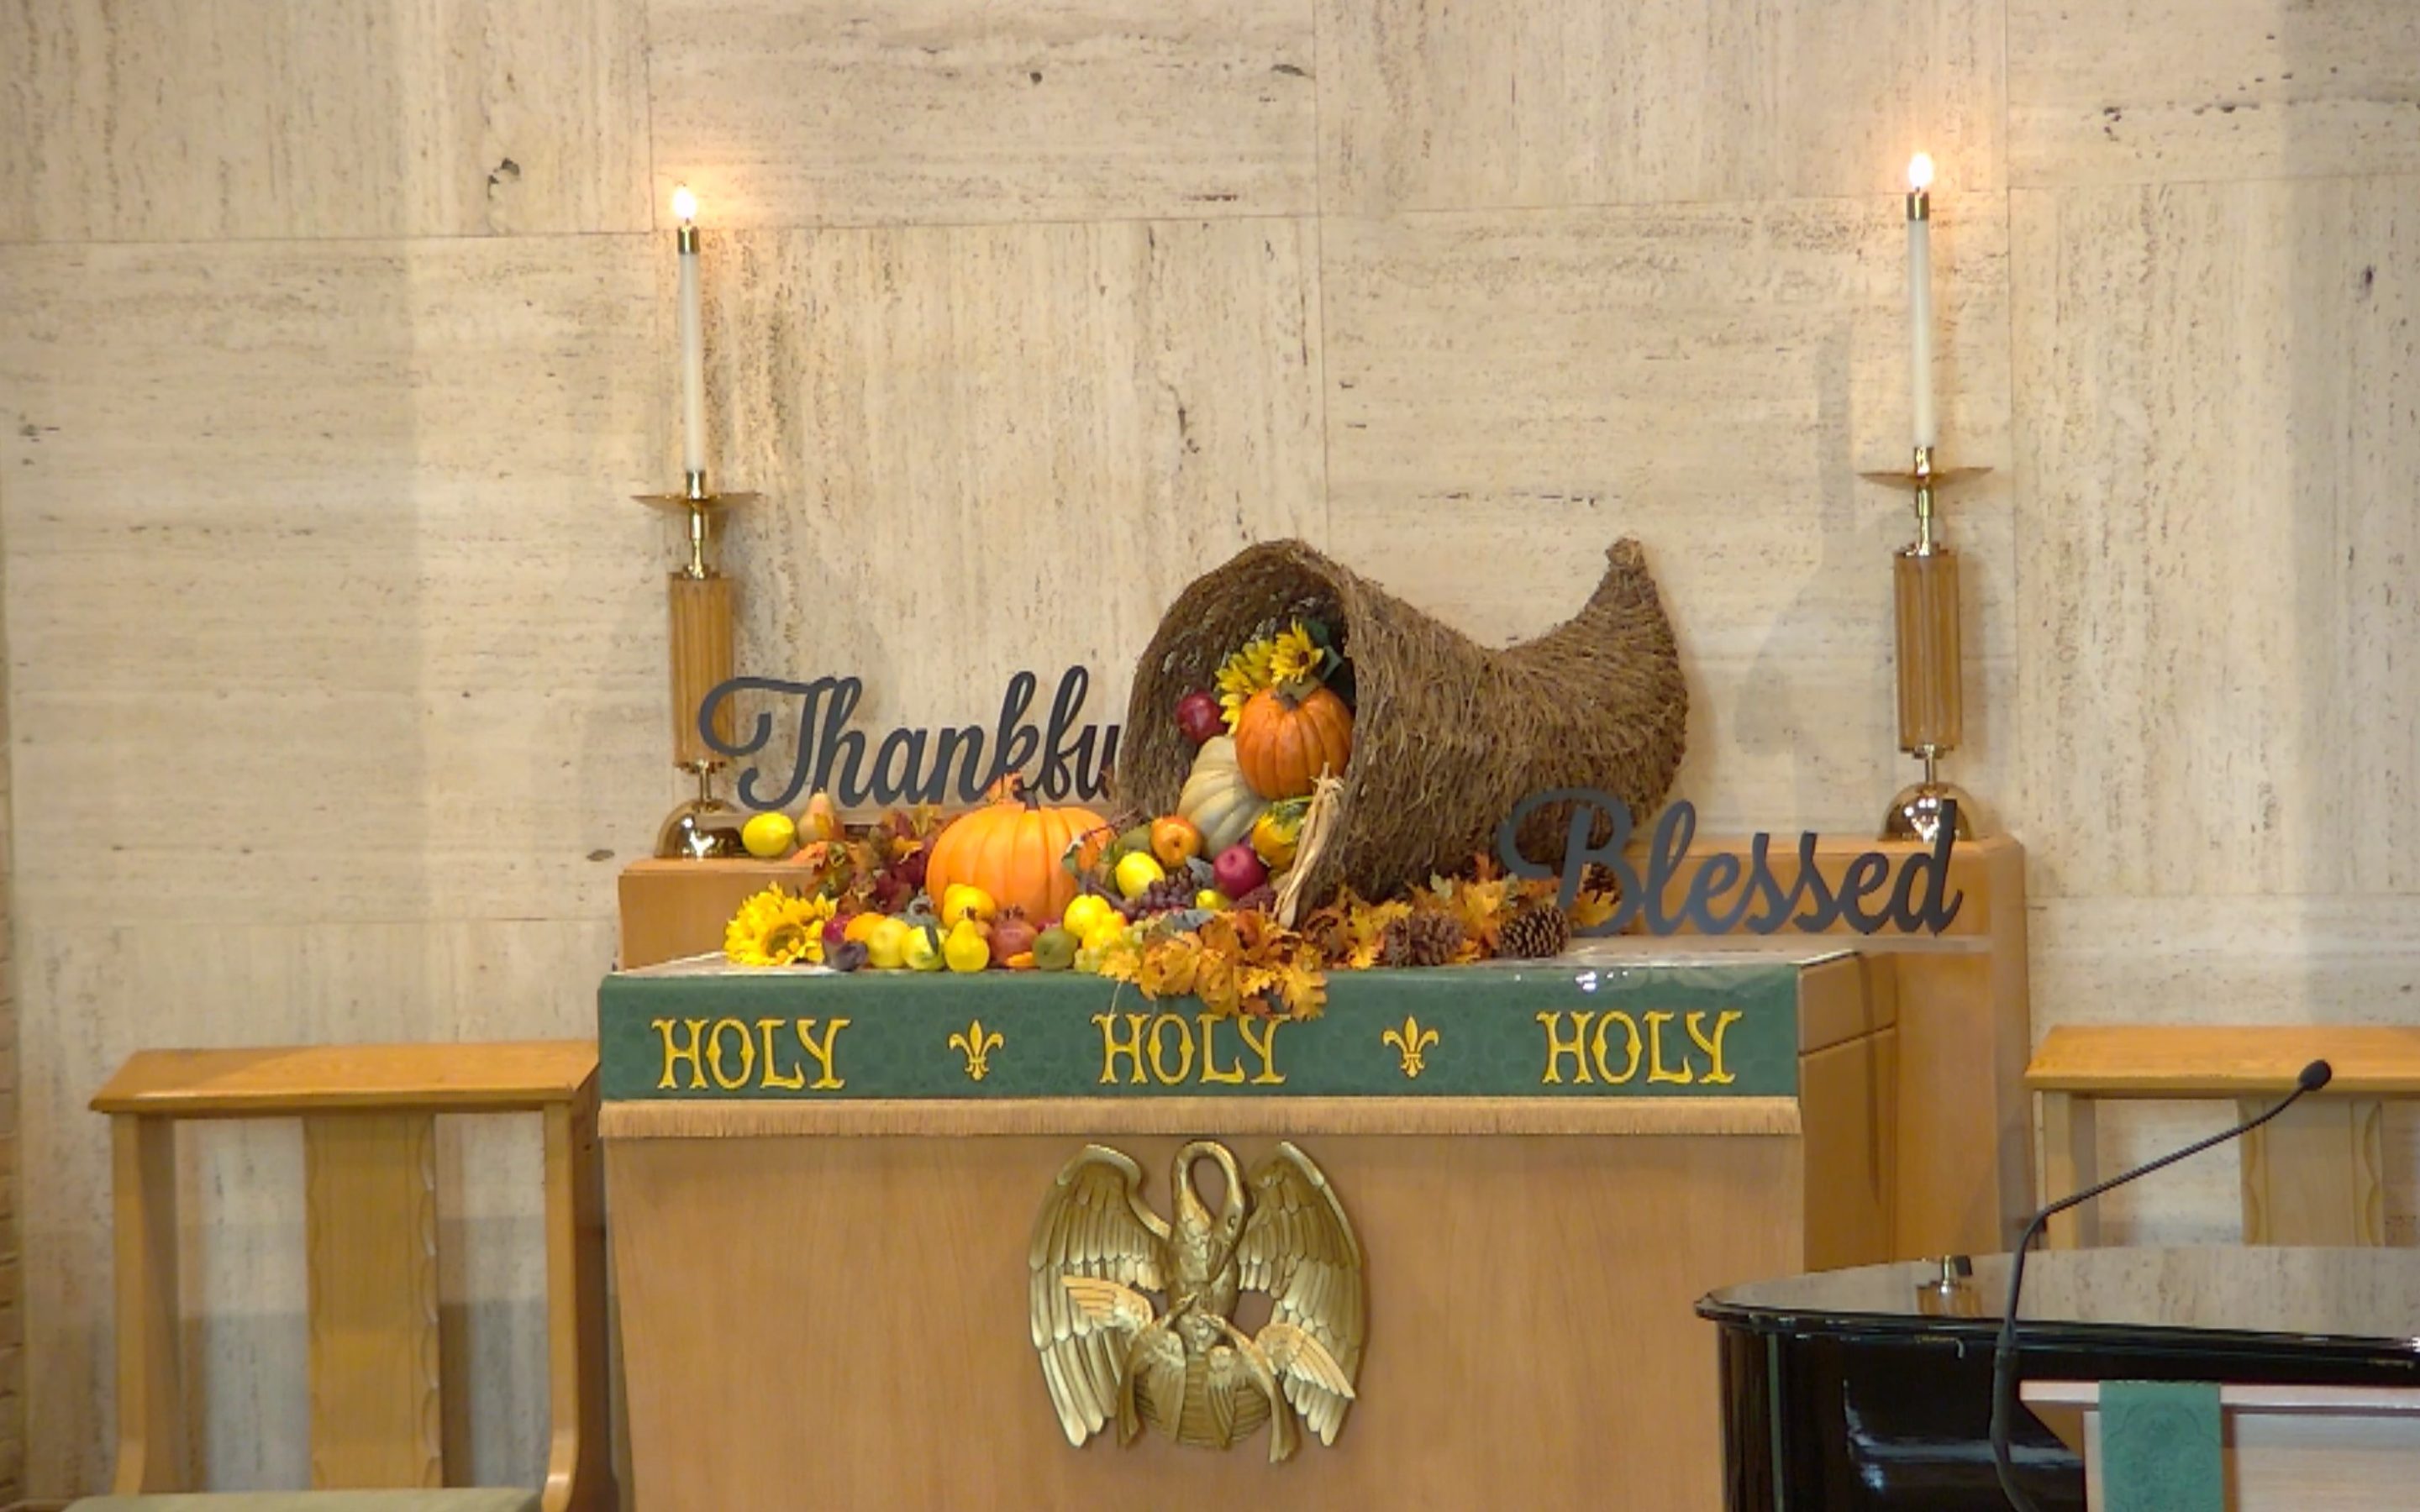 Photo of the sanctuary altar decorated with a cornucopia and vegetables and fall leaves